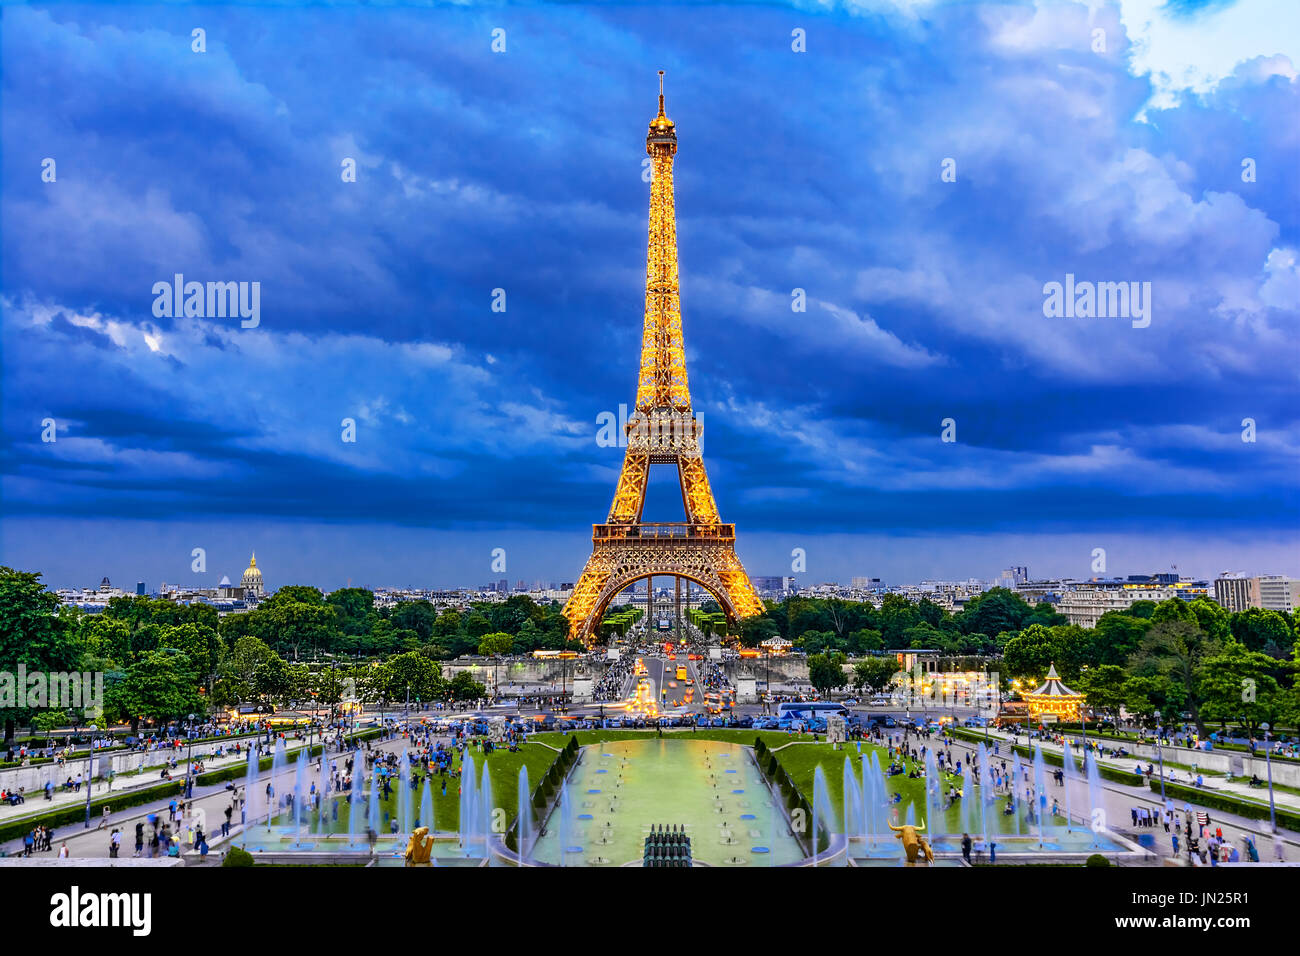 Paris, France - June 8th, 2014: Eiffel Tower illuminated at dusk-during Roland Garros tour. The Eiffel Tower was built in 1889, and is a popular attra Stock Photo